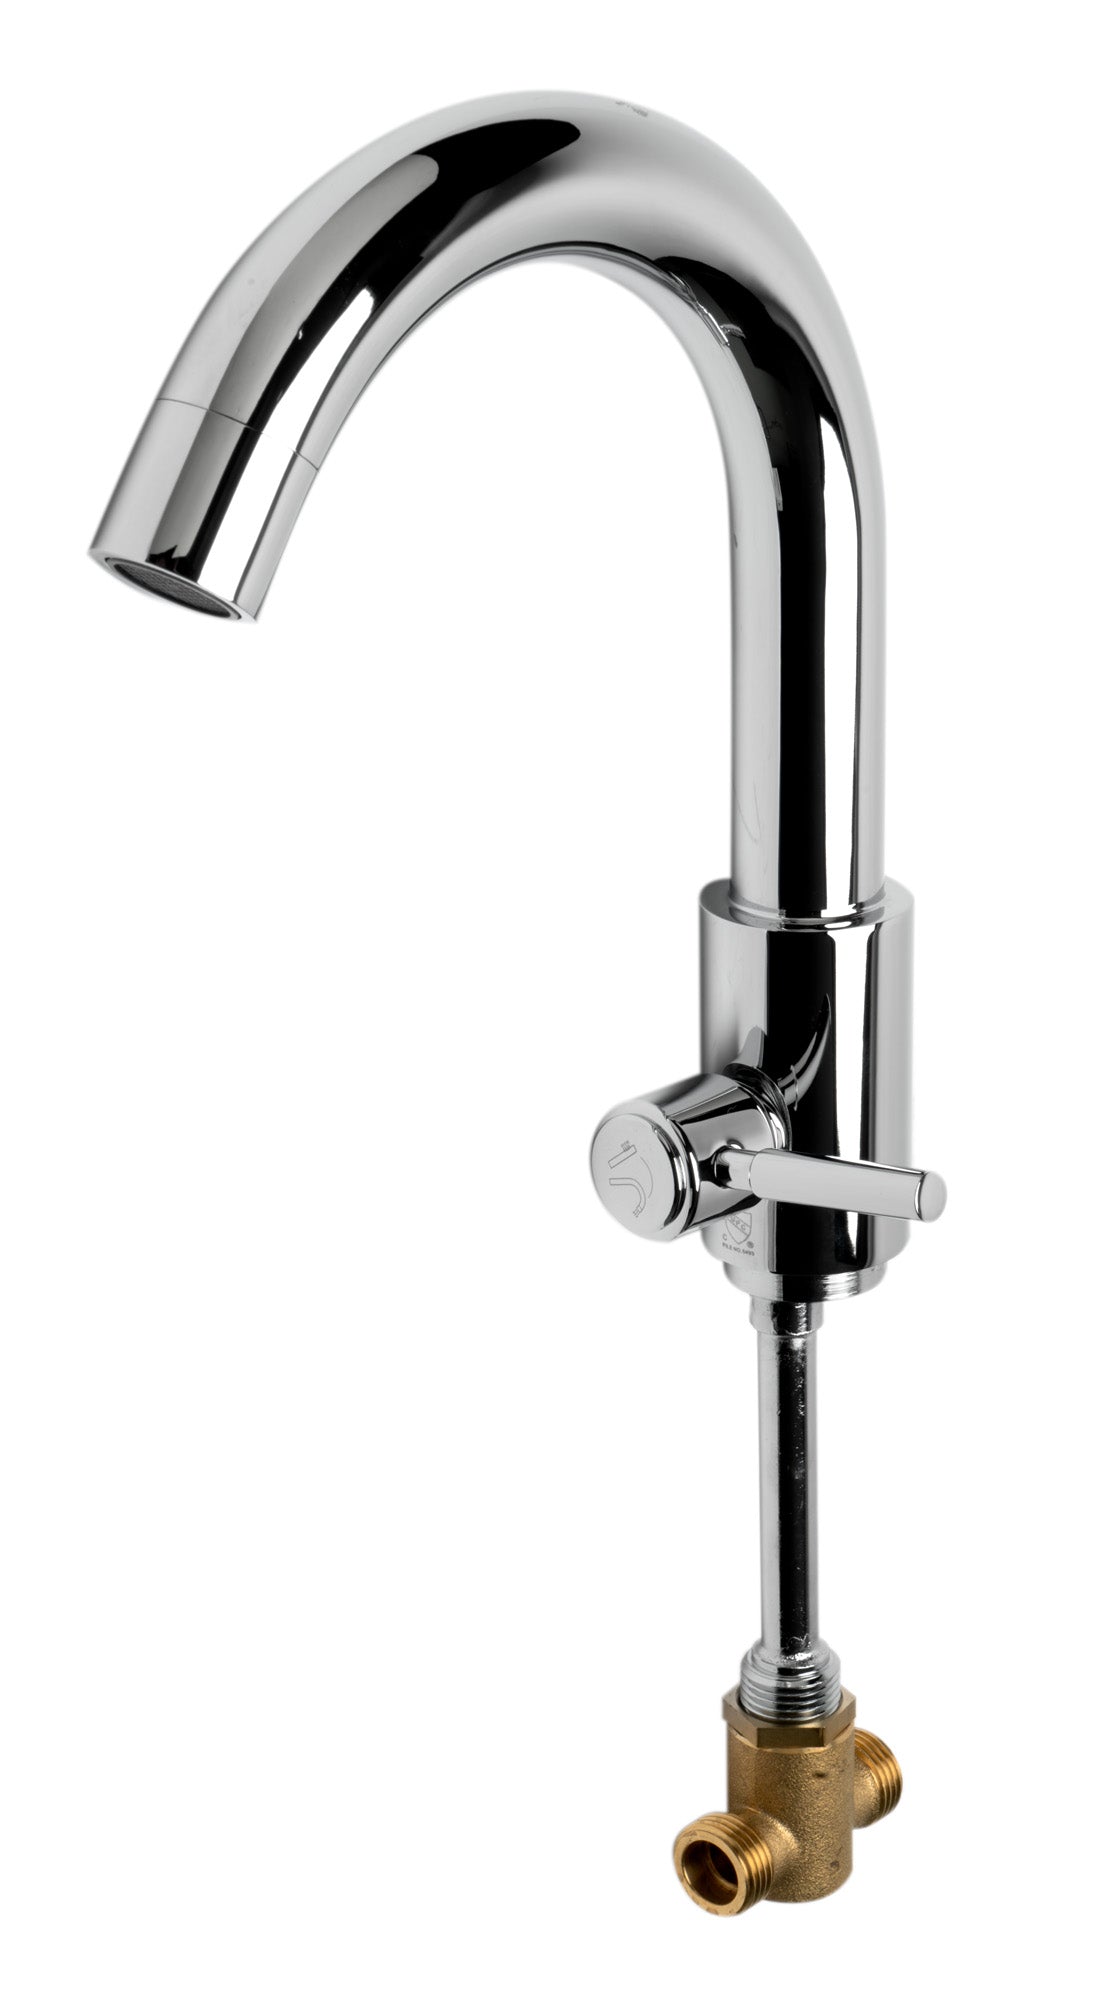 Deck Mounted Tub Filler with Hand Held Showerhead